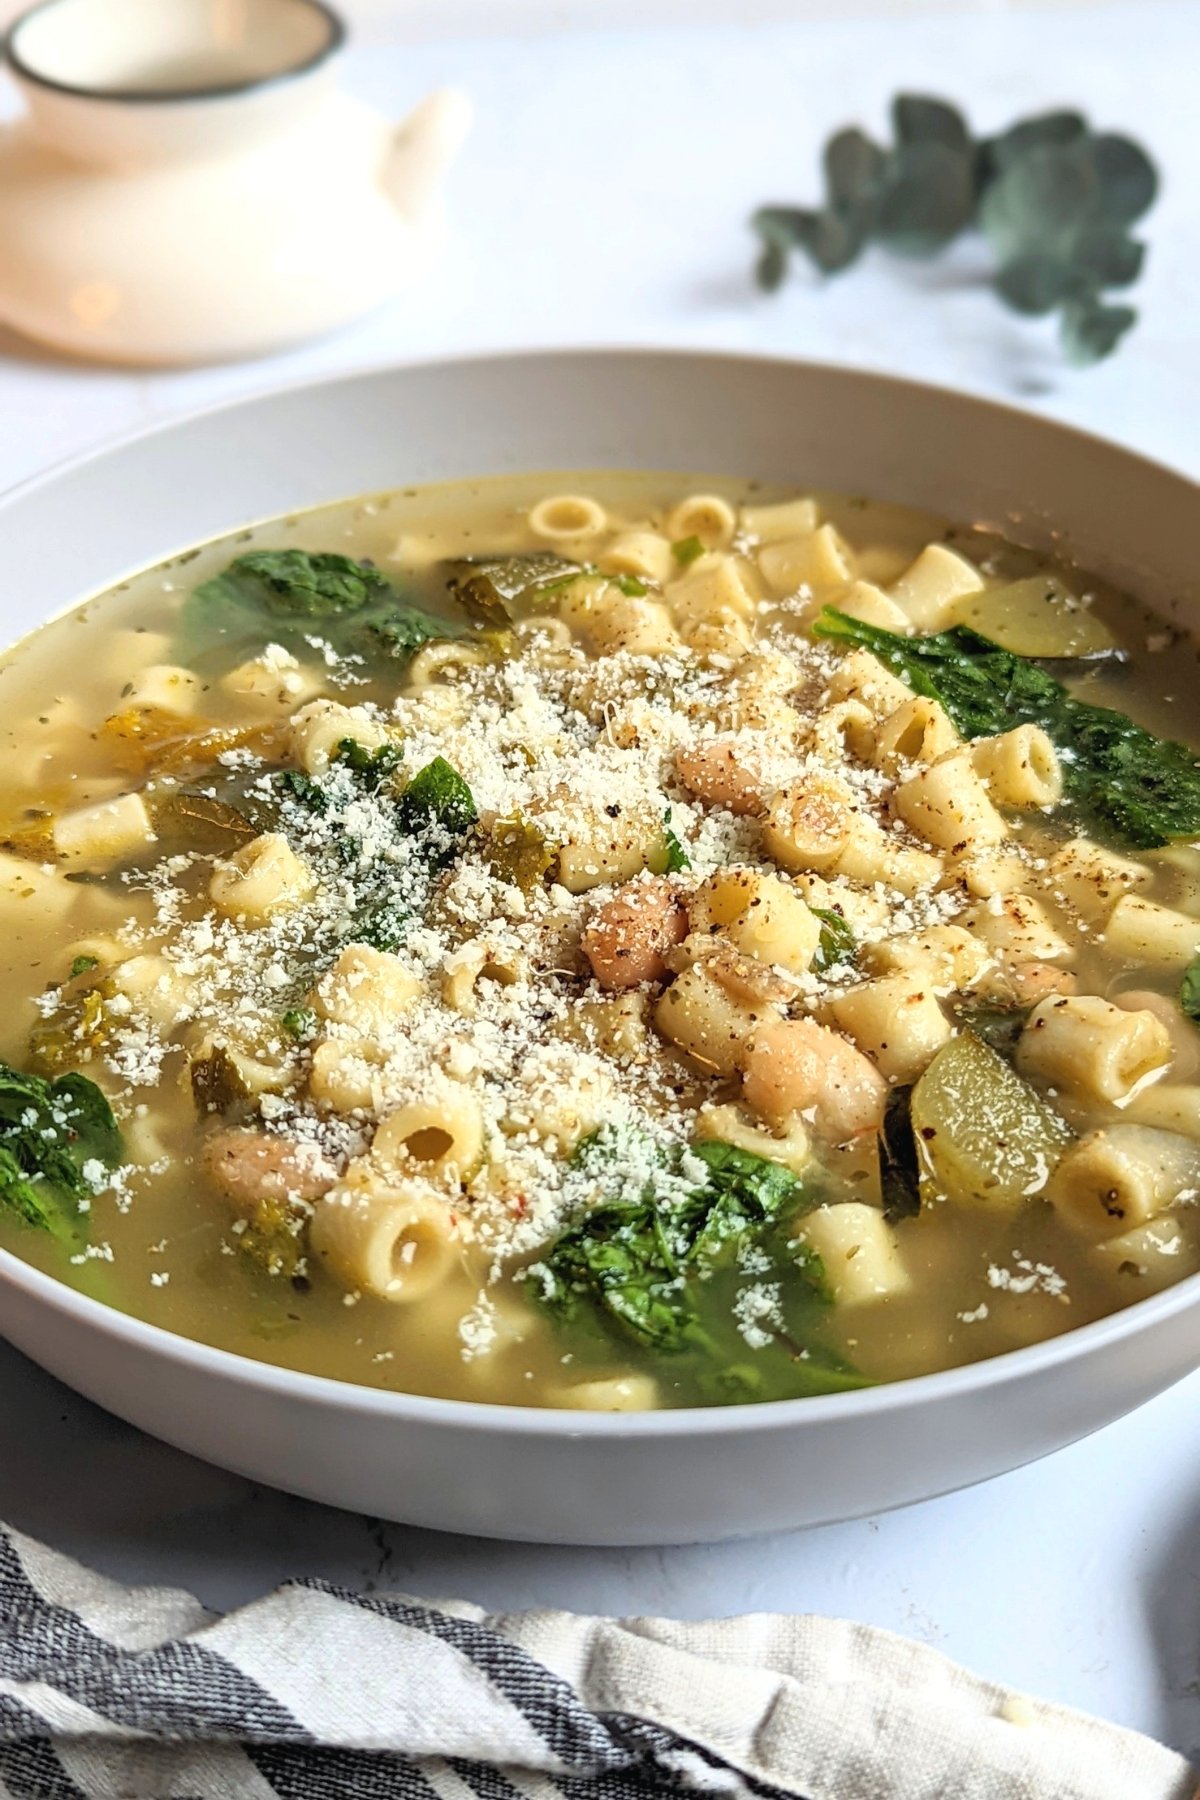 pasta fagioli with spinach or kale and zucchini parmesan cheese soup with pasta and white beans soup creamy pasta e fagioli